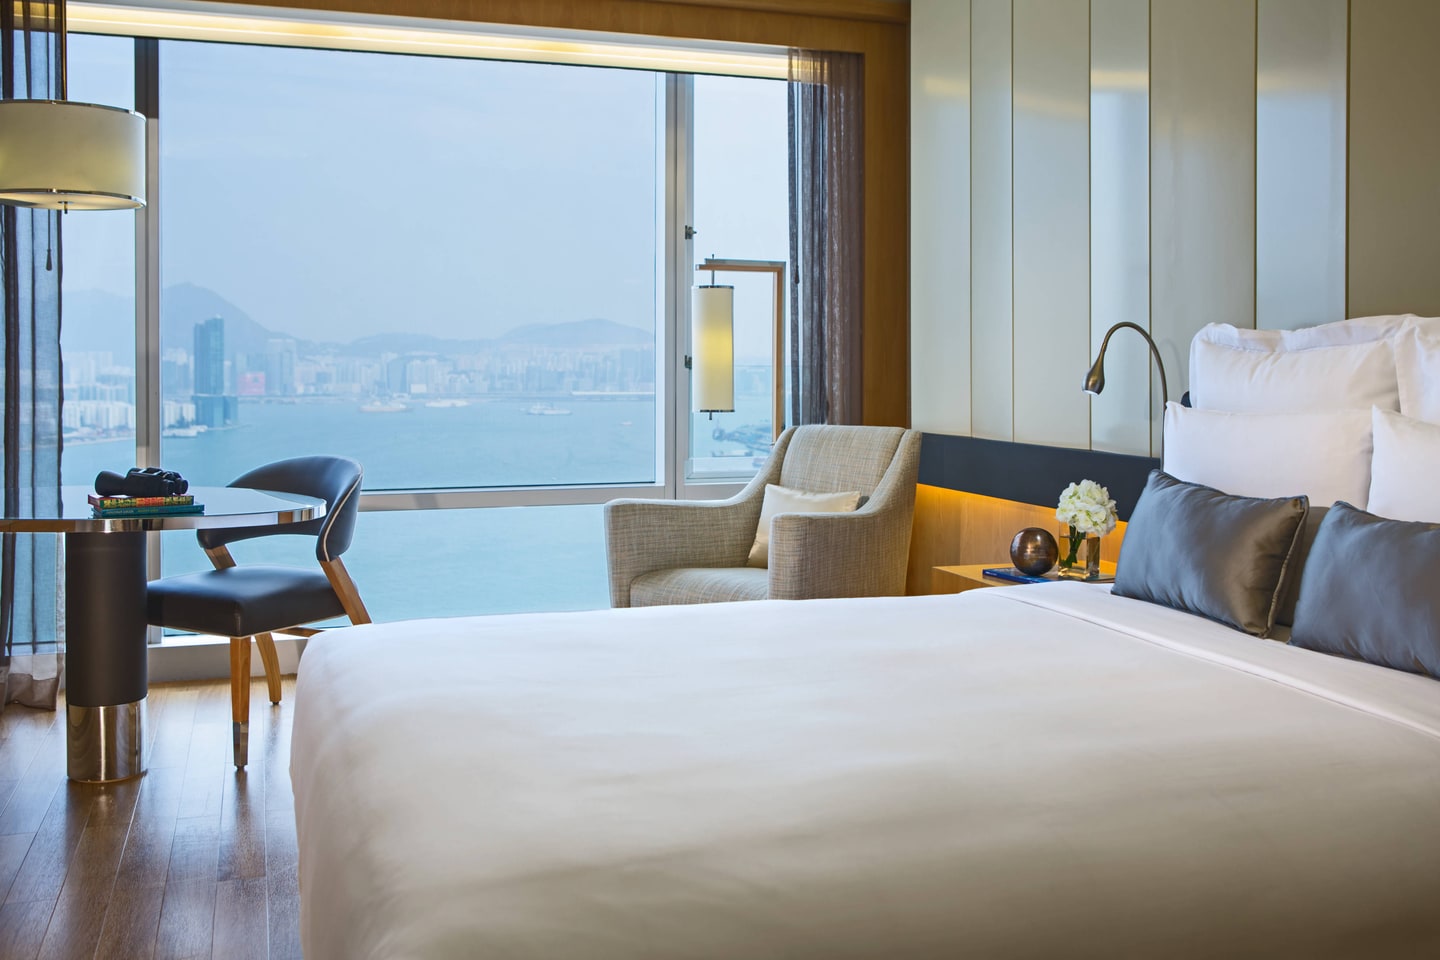 Renaissance Hong Kong Harbour View Hotel is one of the best budget hotels in Hong Kong.